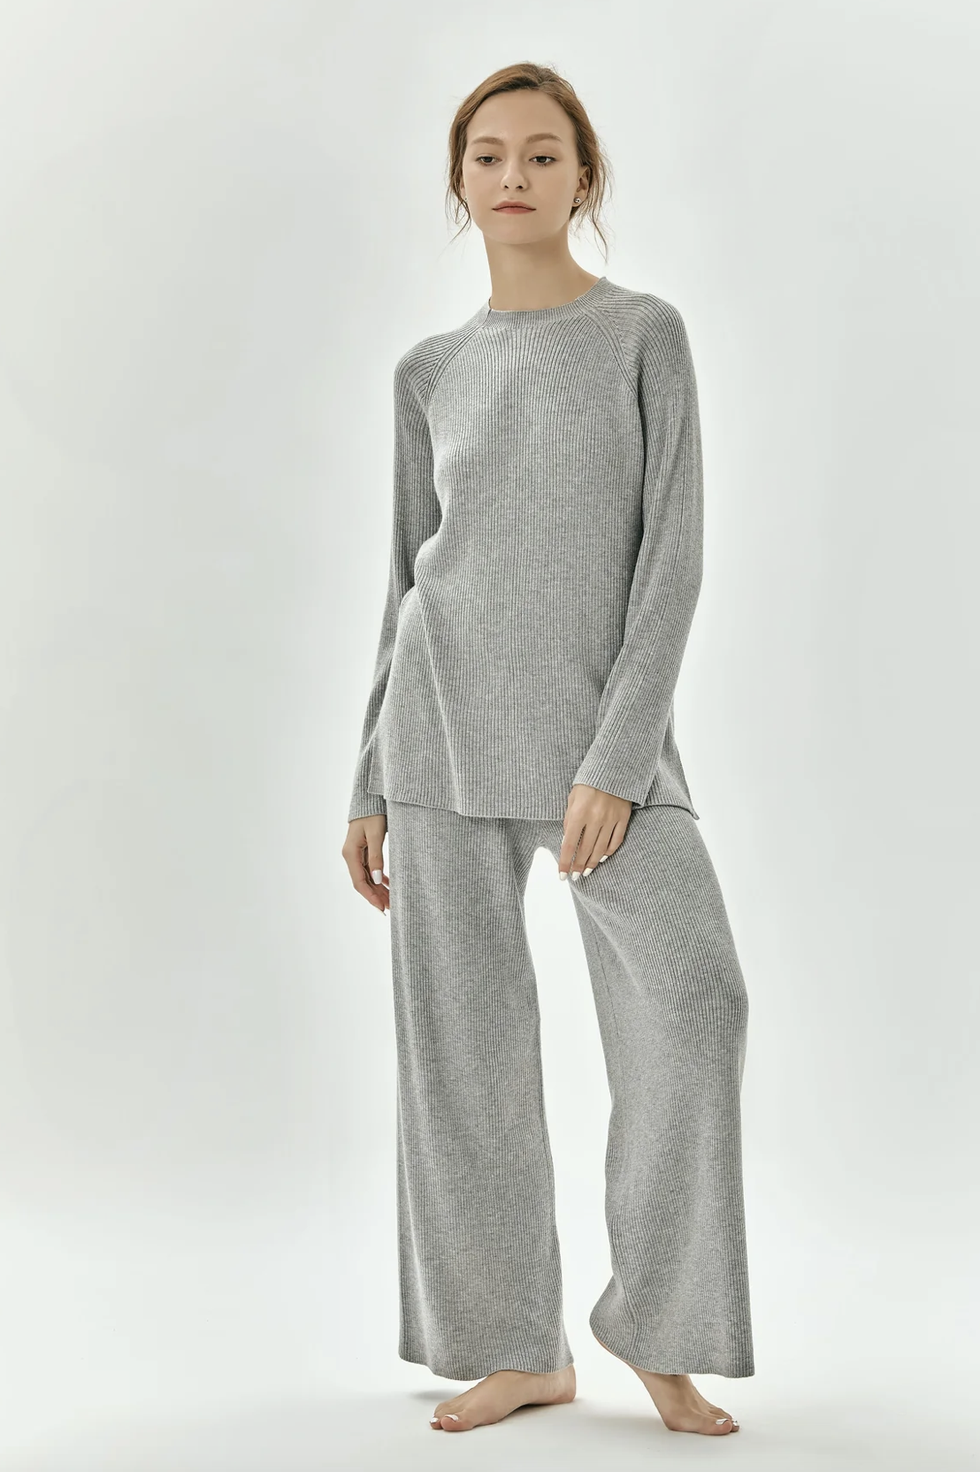 Good quality loungewear that is soft and comfortable to wear. Wrap